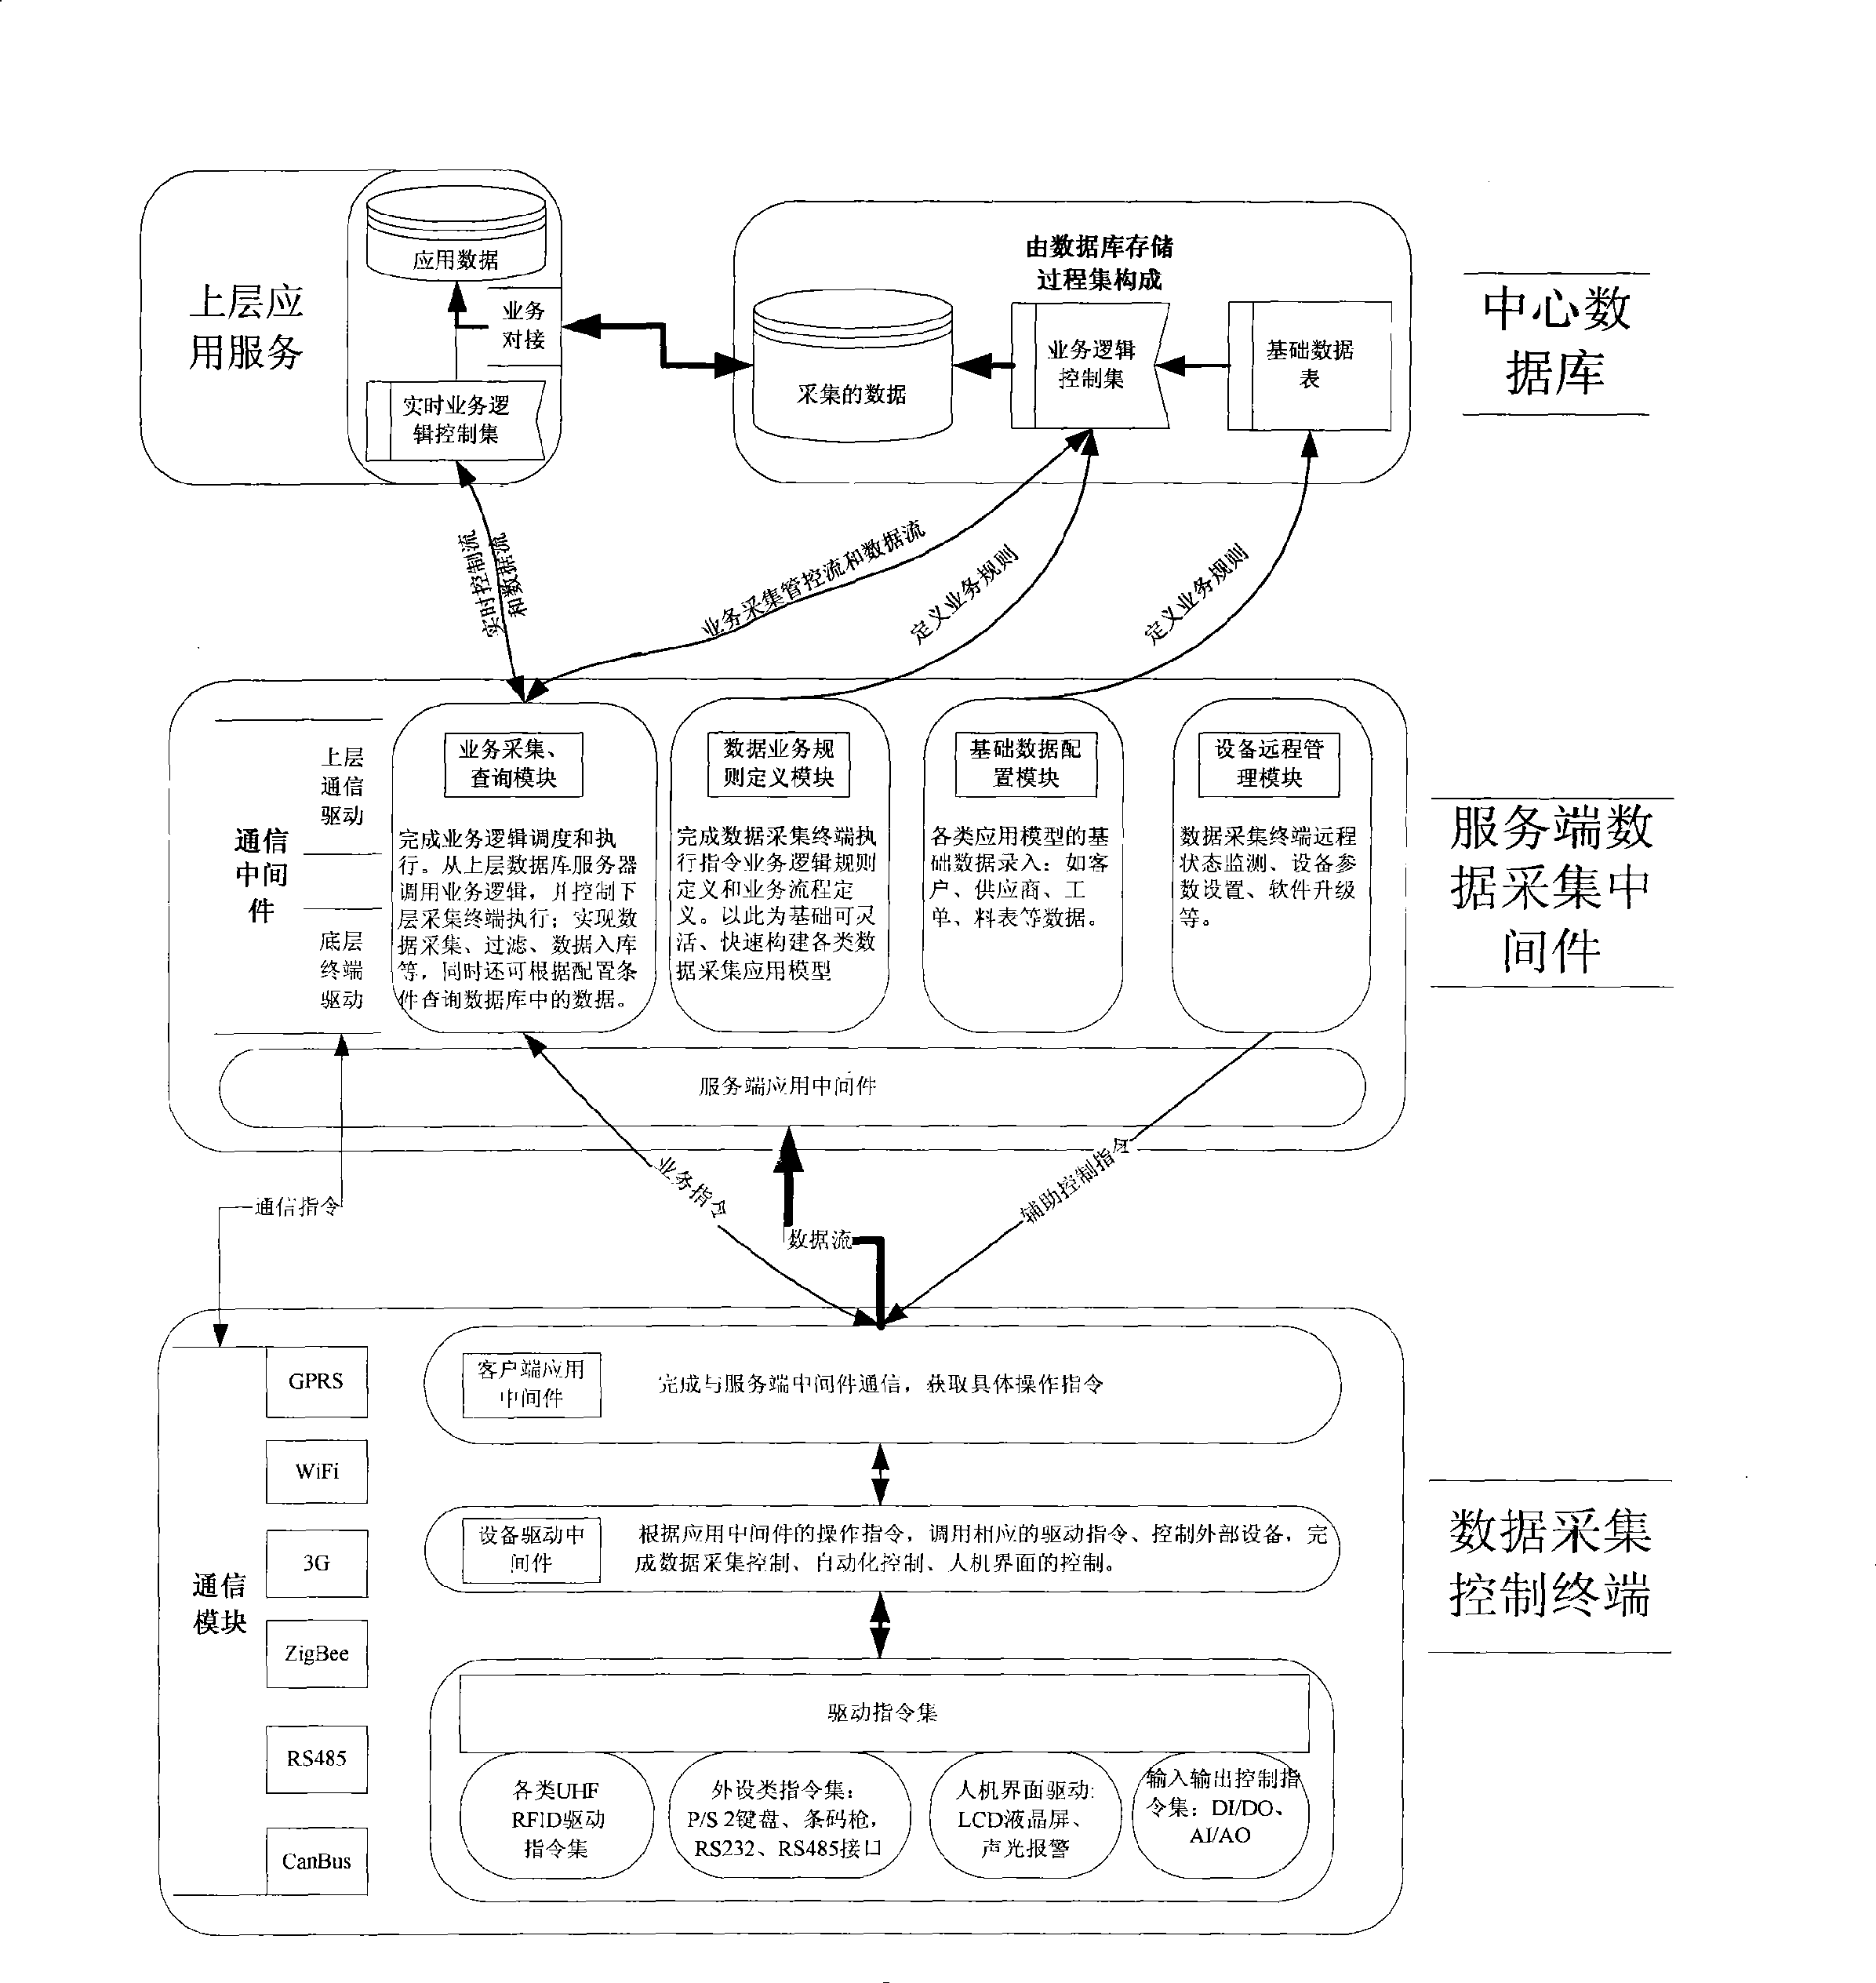 Distributed data acquisition control platform system